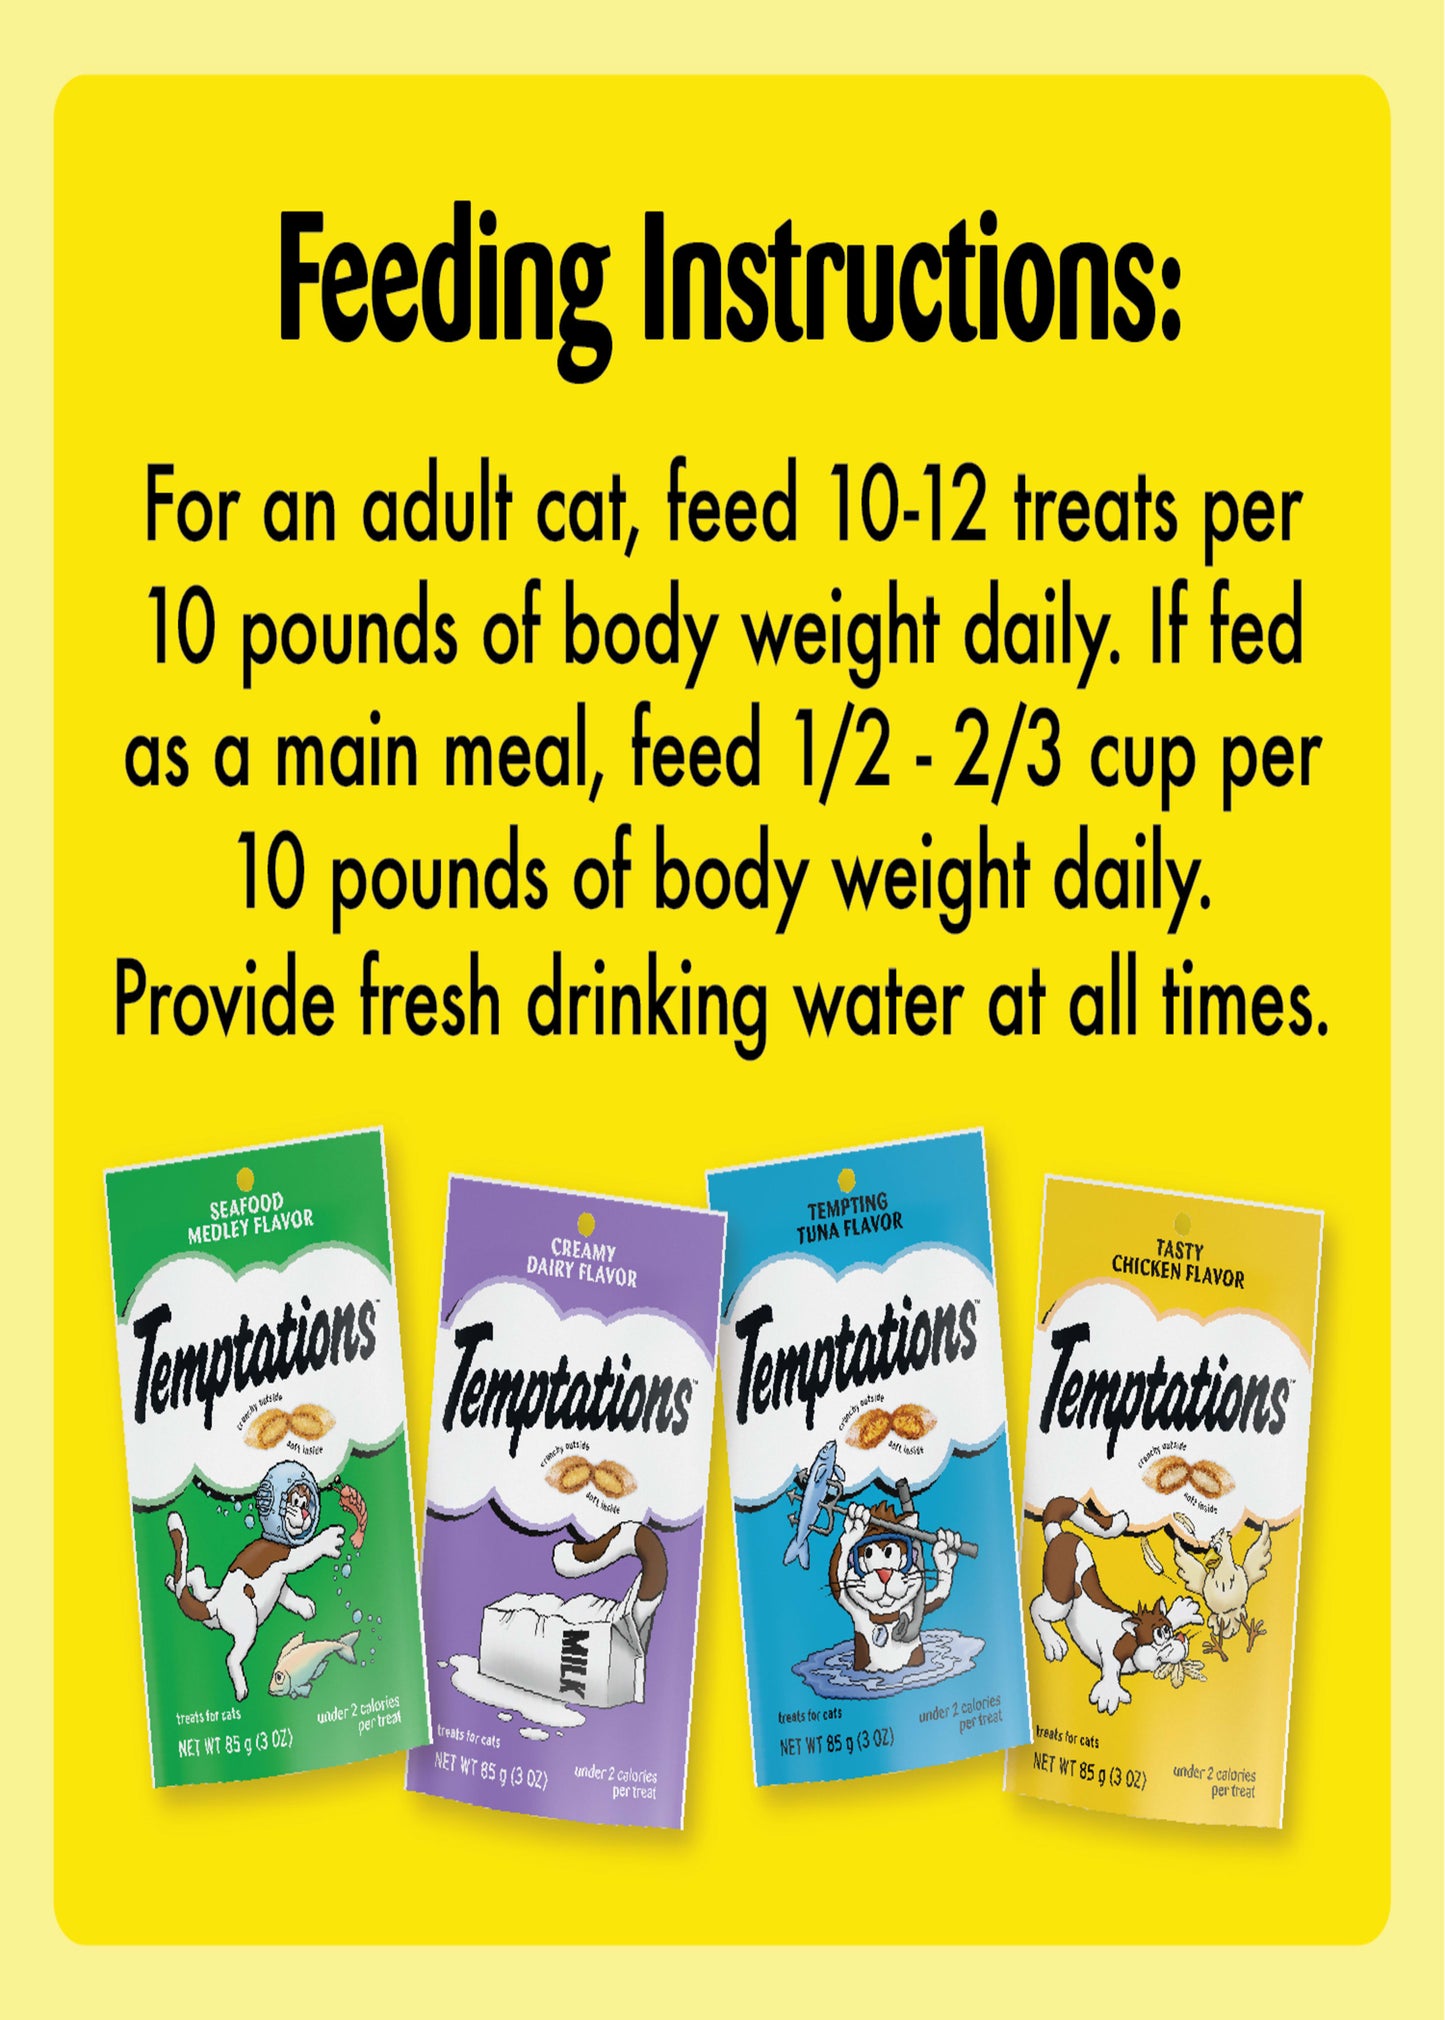 TEMPTATIONS Classic, Crunchy and Soft Cat Treats Feline Favorites Variety Pack, Seafood Medley Flavor, Tasty Chicken Flavor, Creamy Dairy Flavor, and Tempting Tuna Flavor, (4) 3 Oz. Pouches